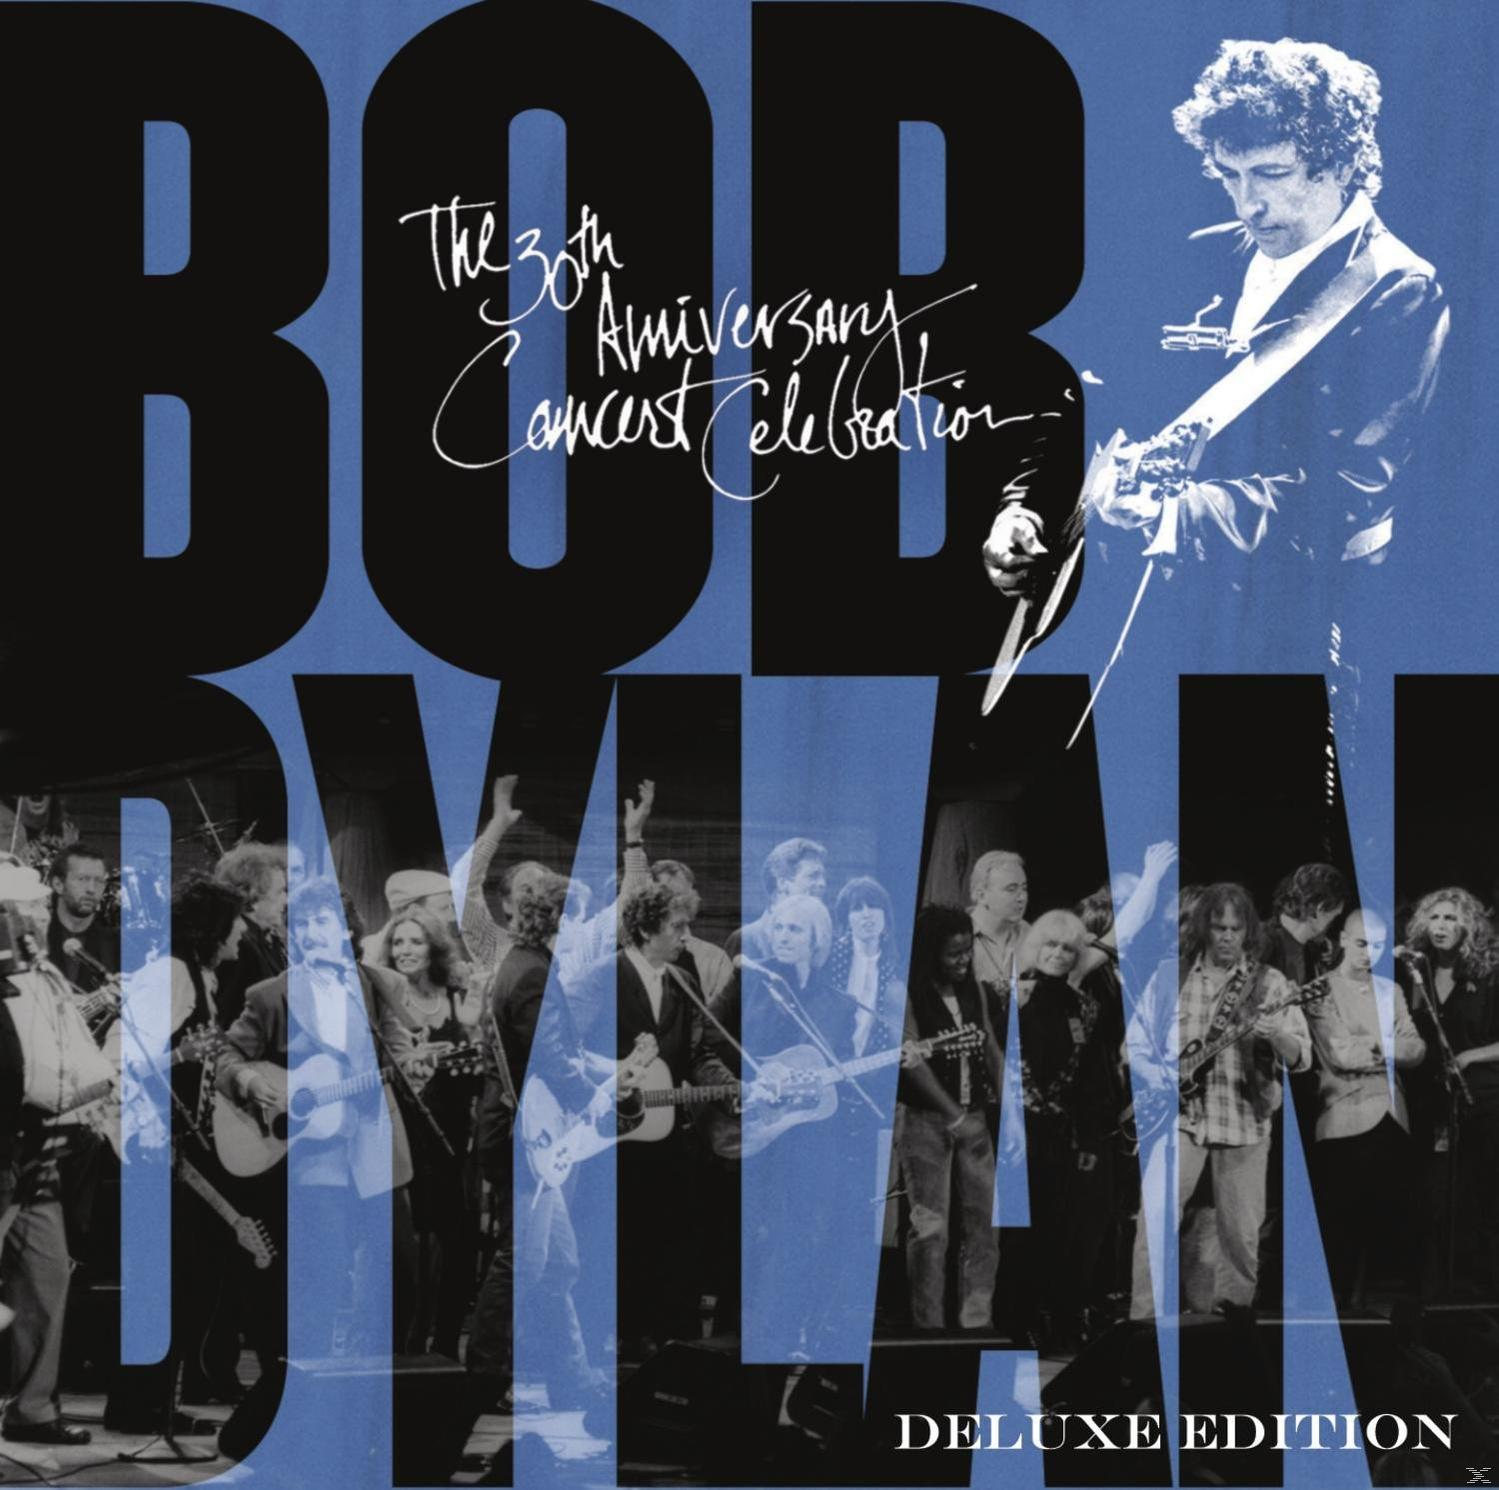 Celebration - 30th Anniversary - Edition) (Deluxe Concert VARIOUS (CD)